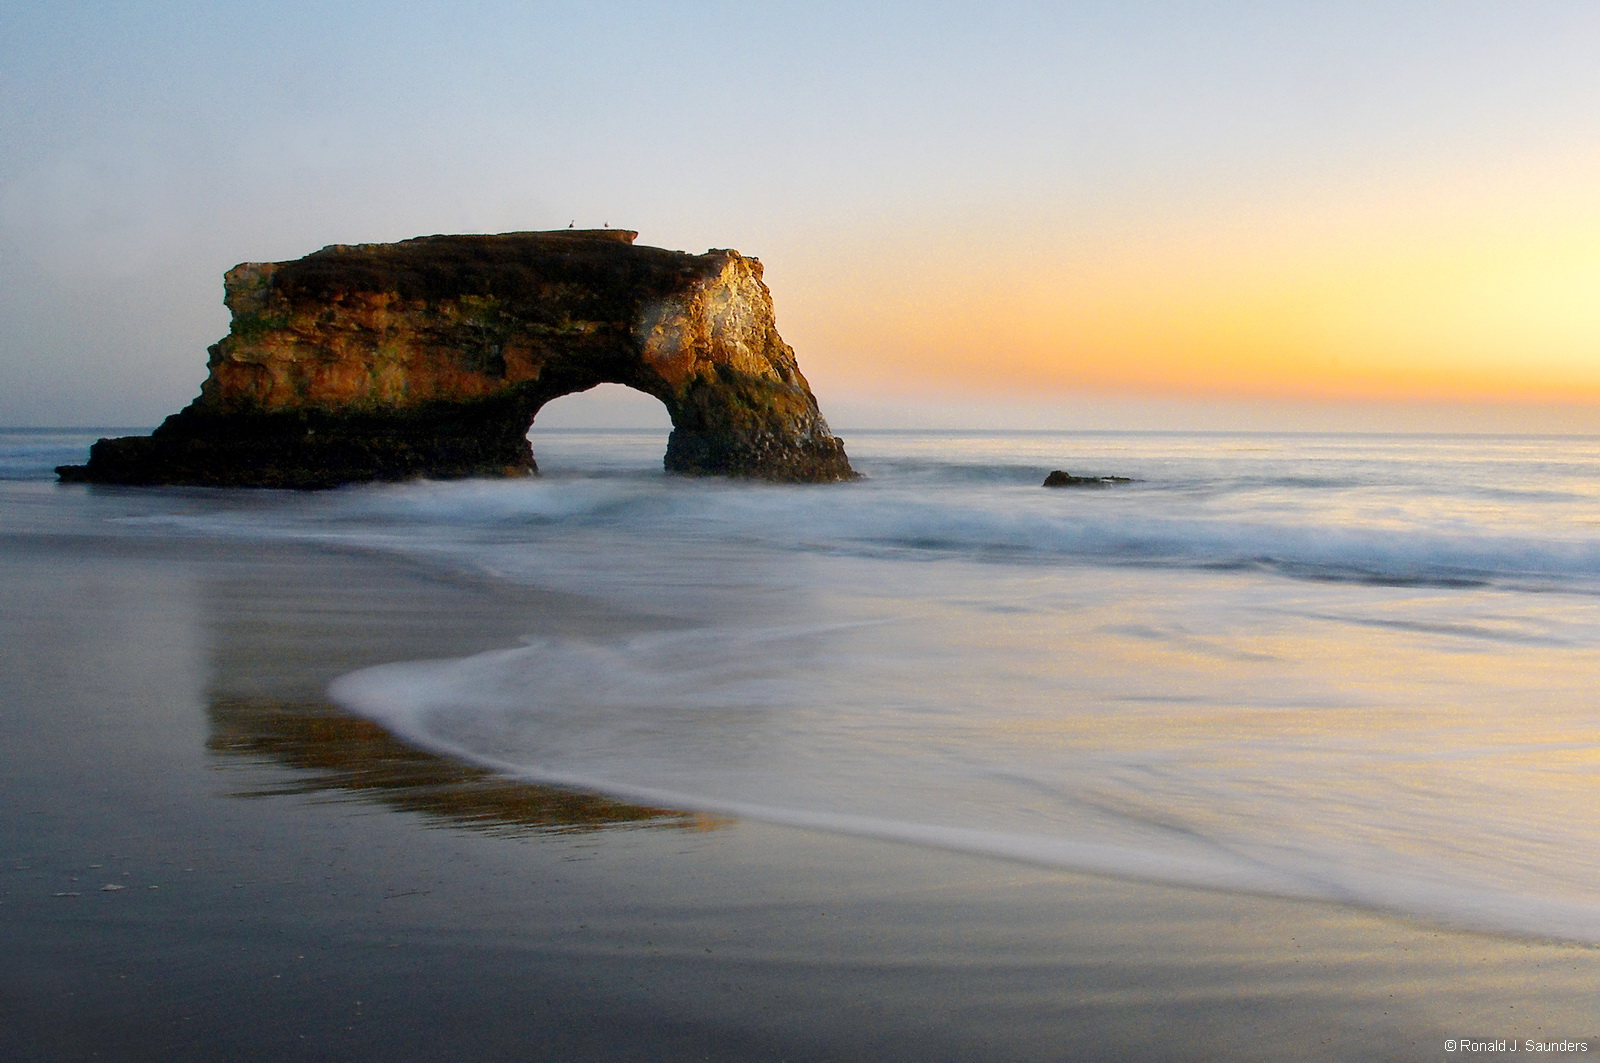 A sunset view of the arch at Natural Bridges State Beach. The beach features picturesque arches cut out by ocean waves in a sandstone...